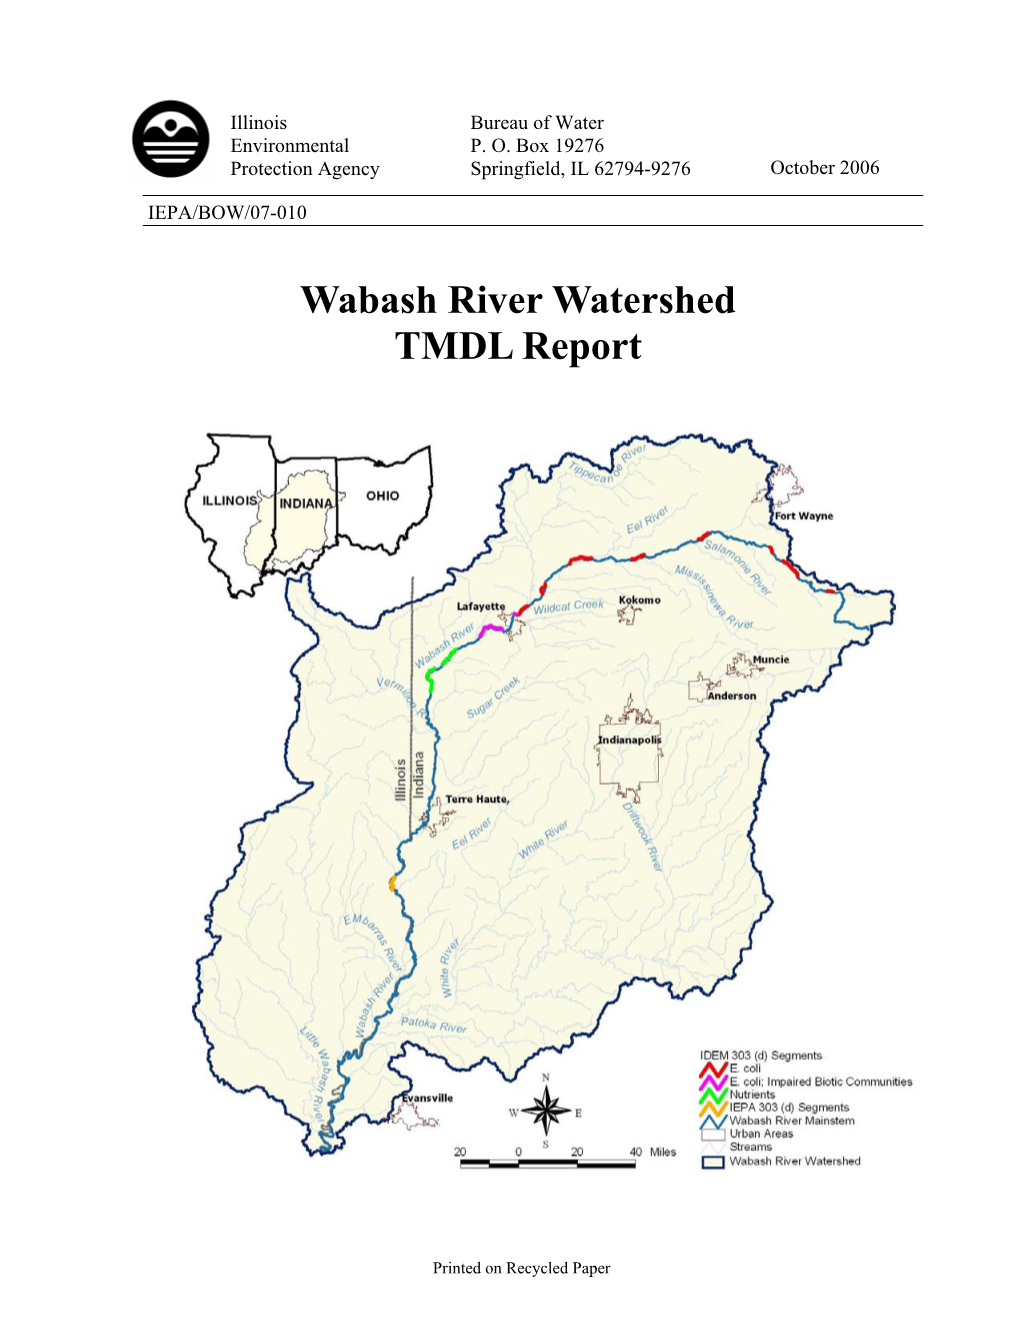 Wabash River Watershed TMDL Report